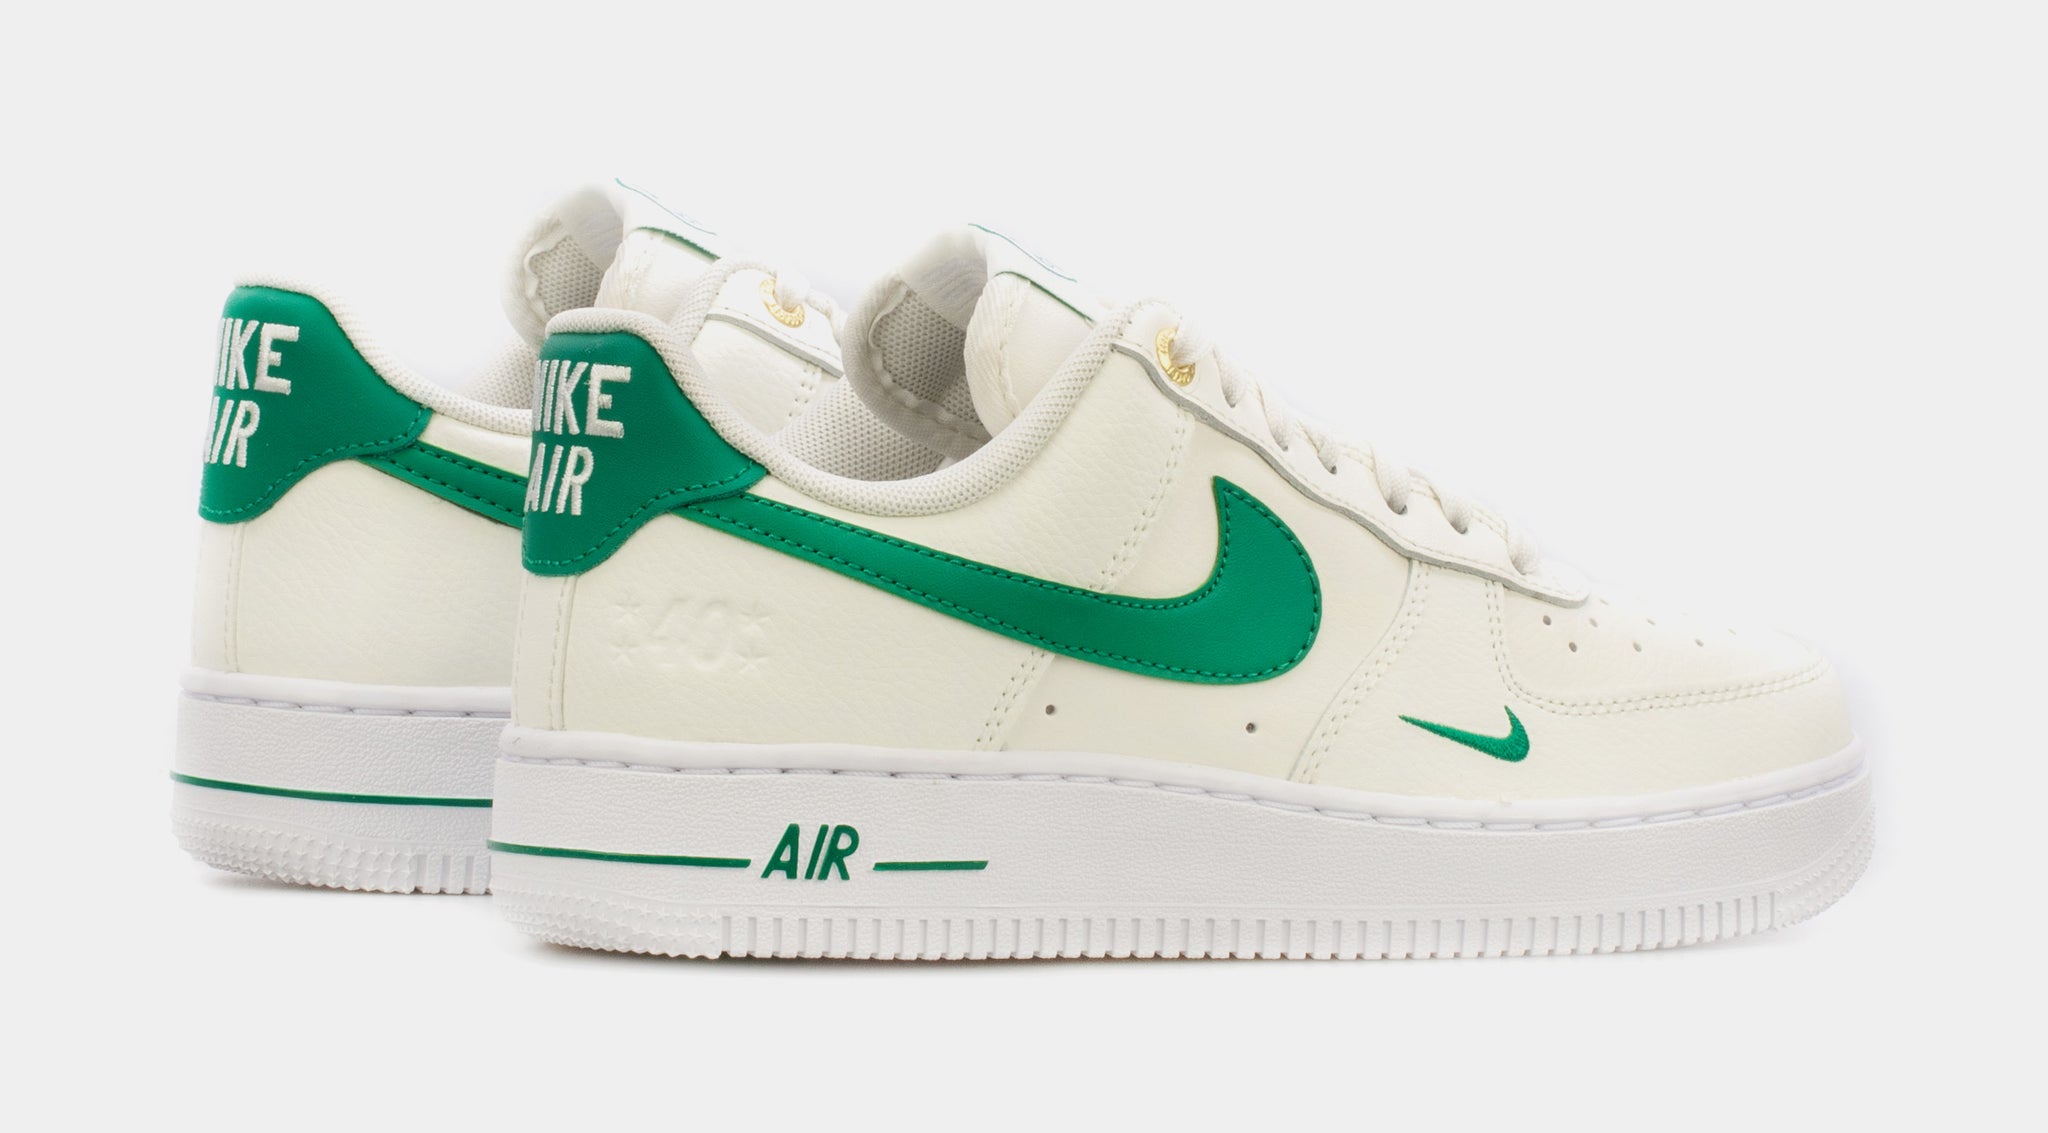 Air force 1 leather trainers Nike Green size 38 EU in Leather - 31559549